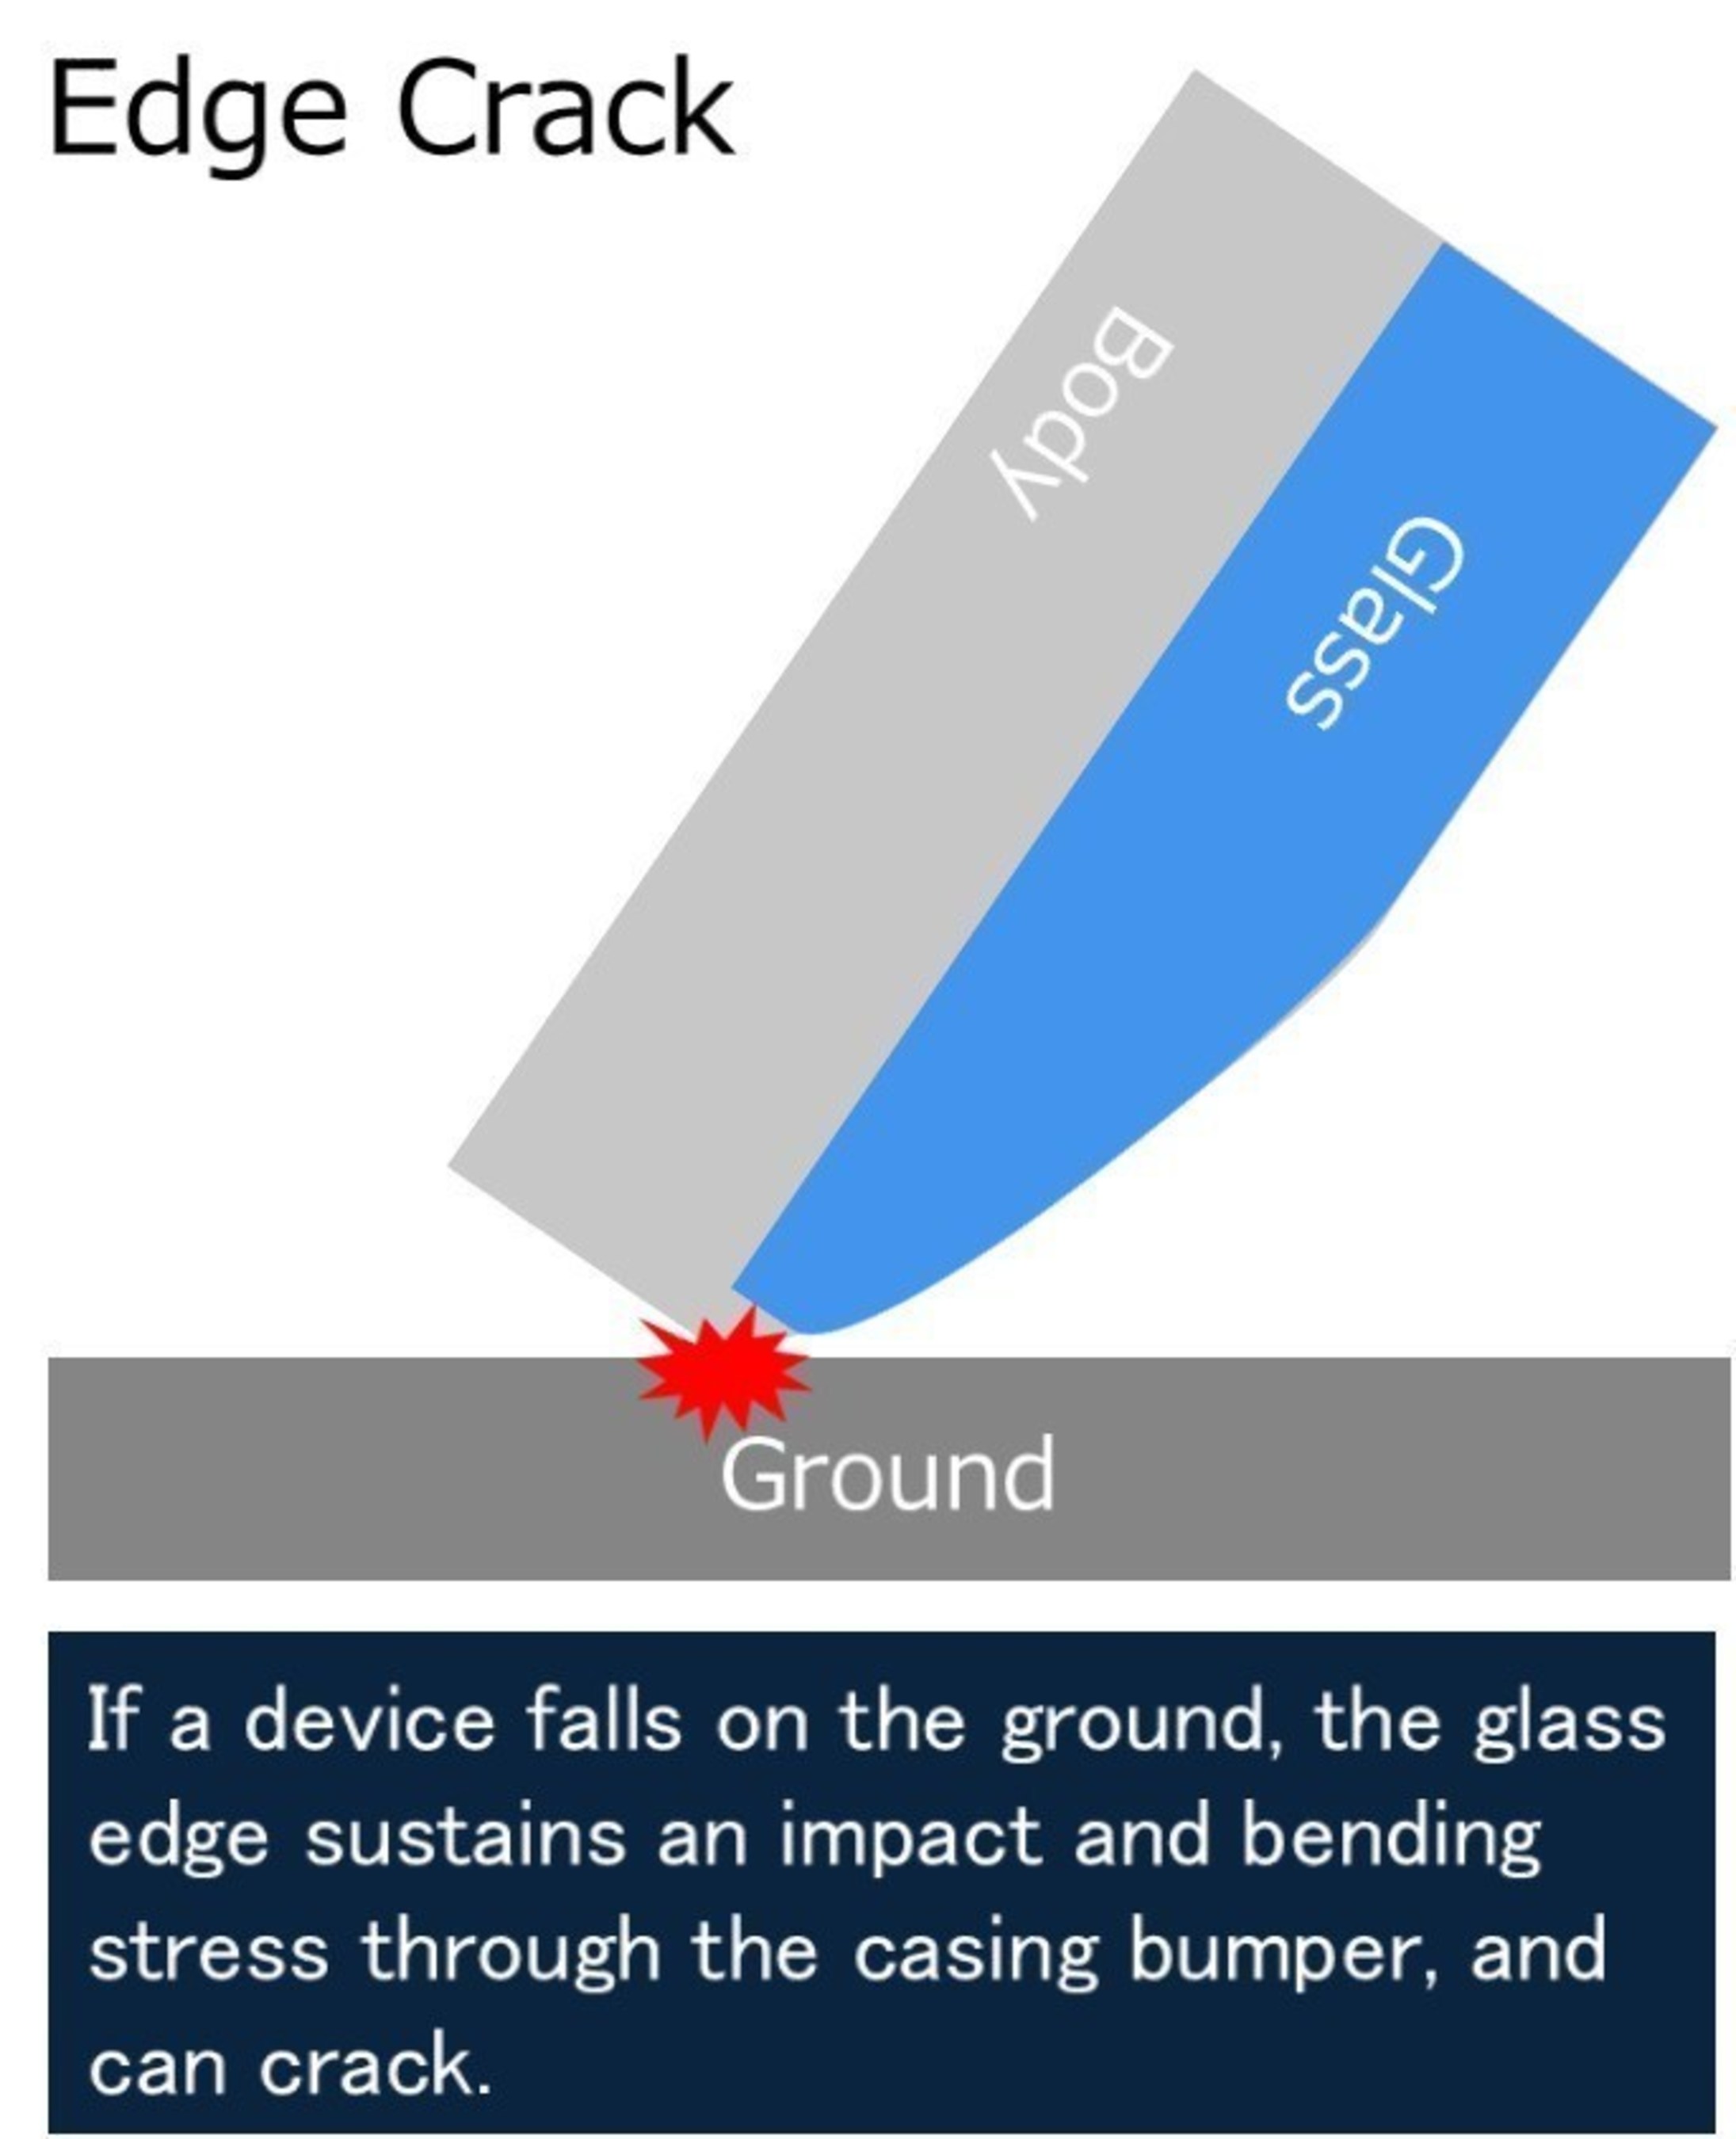 If a device falls on the ground, the glass edge sustains an impact and bending stress through the casing bumper, and can crack.